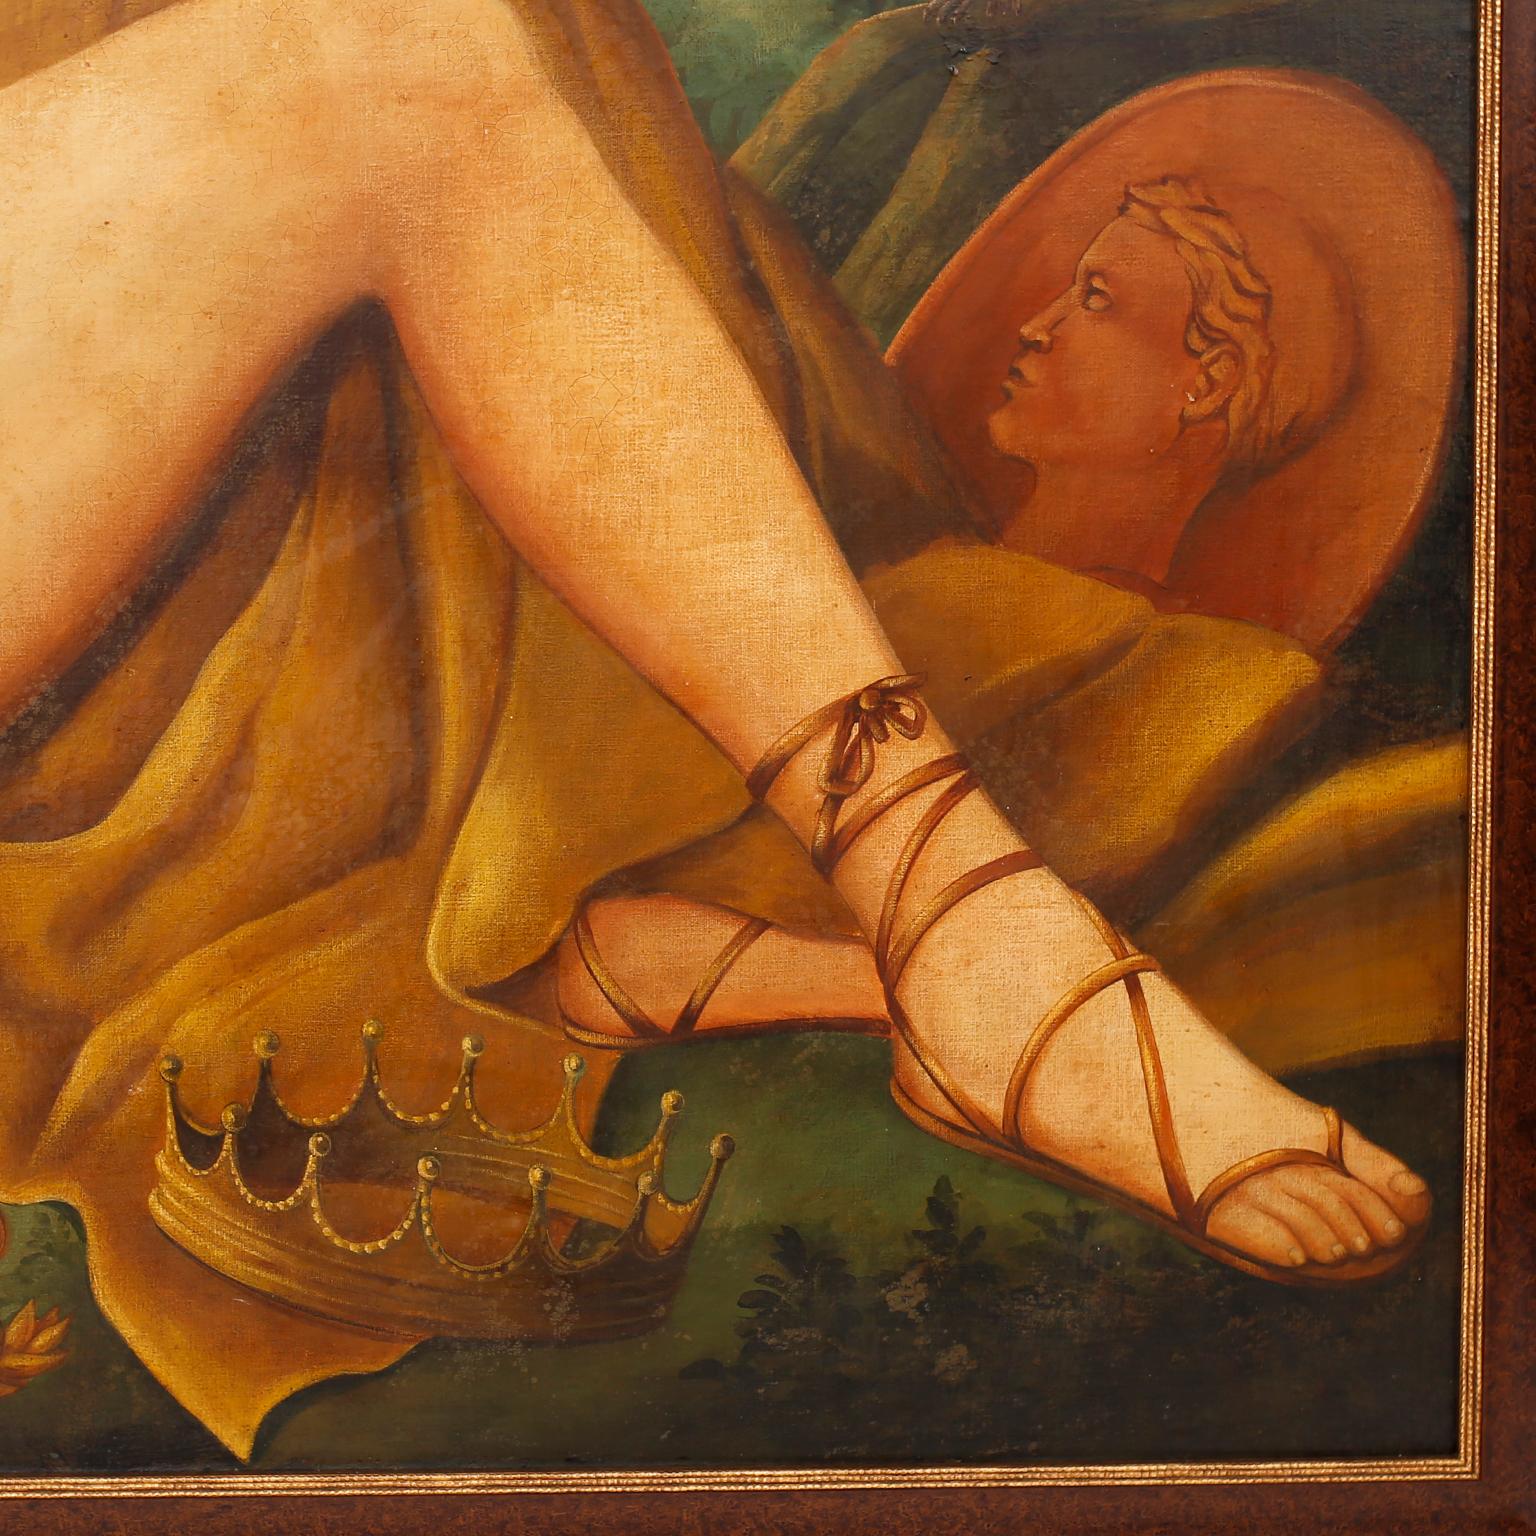 Oil Painting of a Reclining Woman, L'Europe by Skilling - Brown Figurative Painting by William Skilling